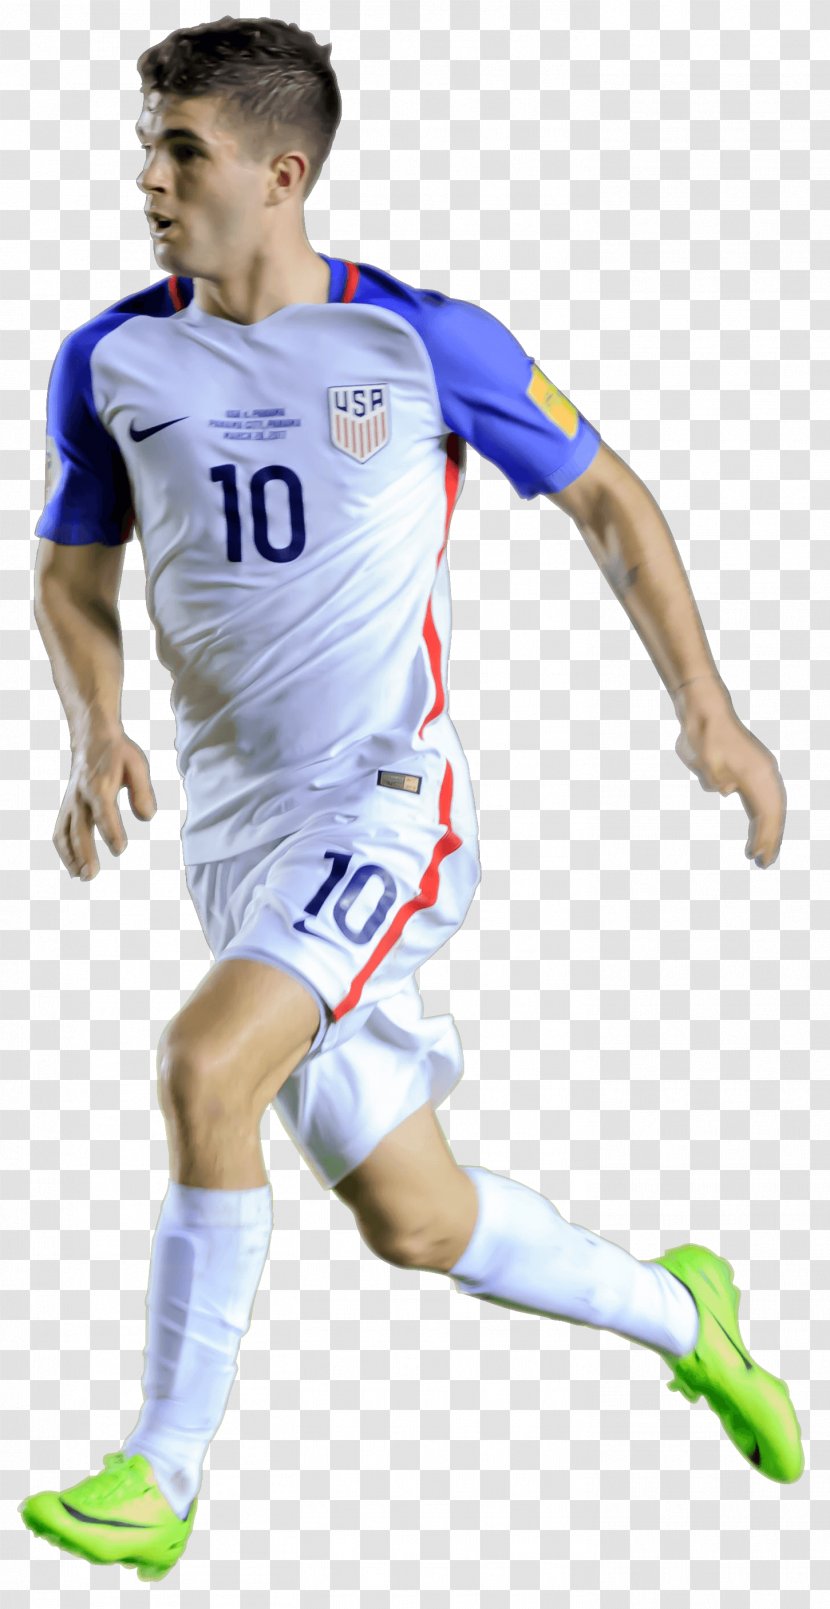 Christian Pulisic National Soccer Hall Of Fame United States Men's Team Football Player Transparent PNG